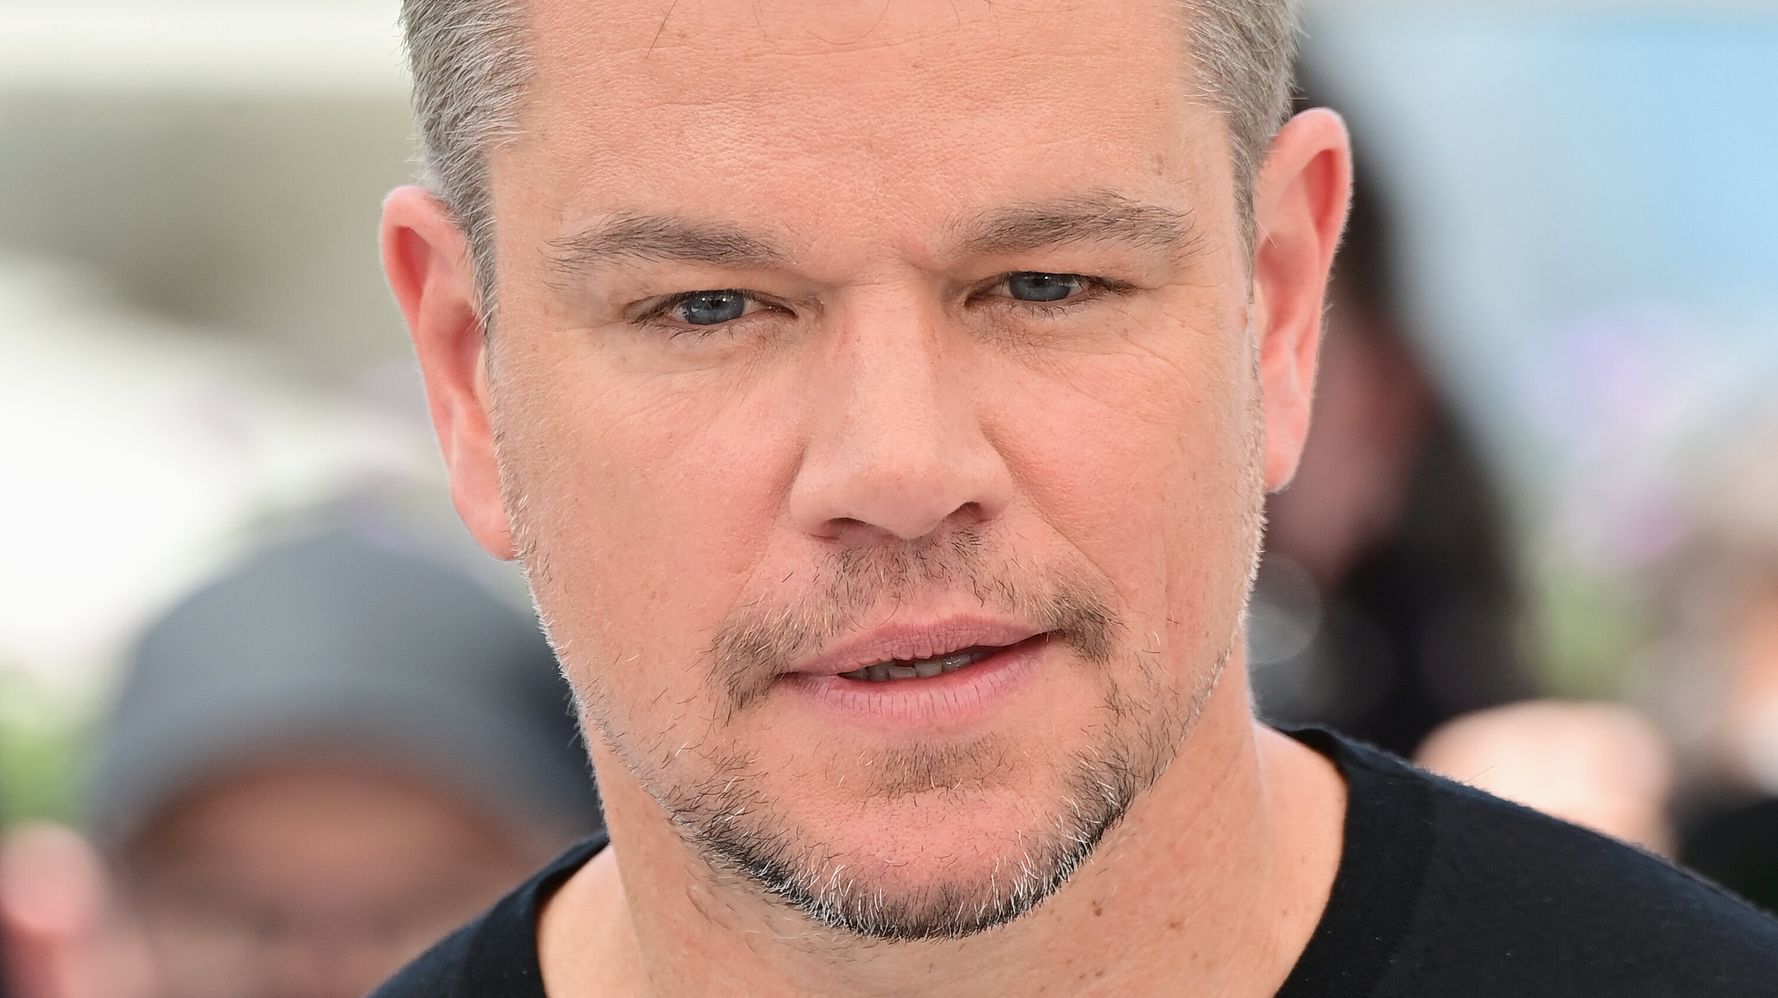 Matt Damon Now Says He Doesn't 'Use Slurs Of Any Kind' After Backlash Over Interview